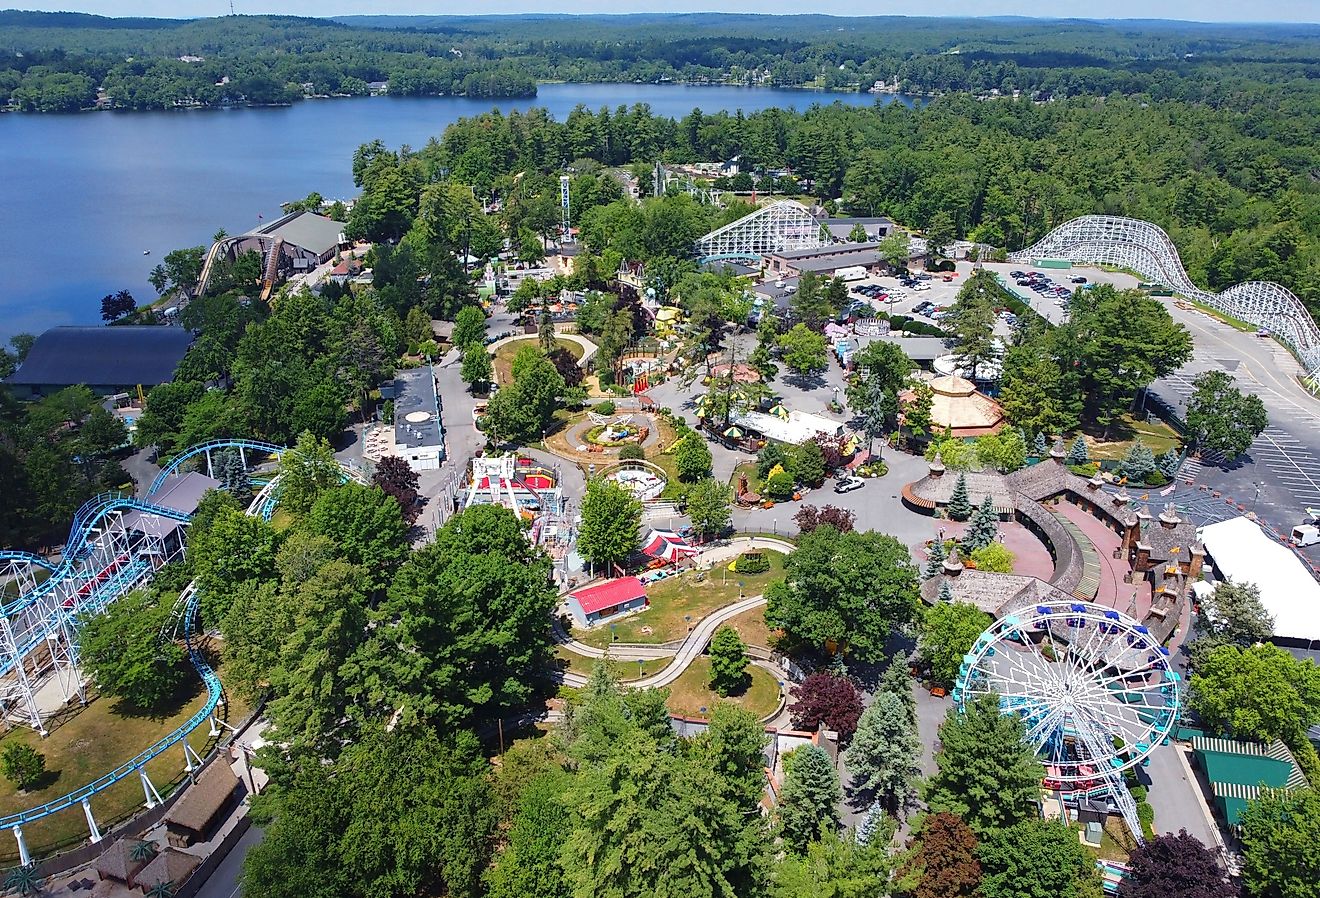 Aerial view of Historic Canobie Lake Park by the Canobie Lake in town of Salem, New Hampshire NH, USA.